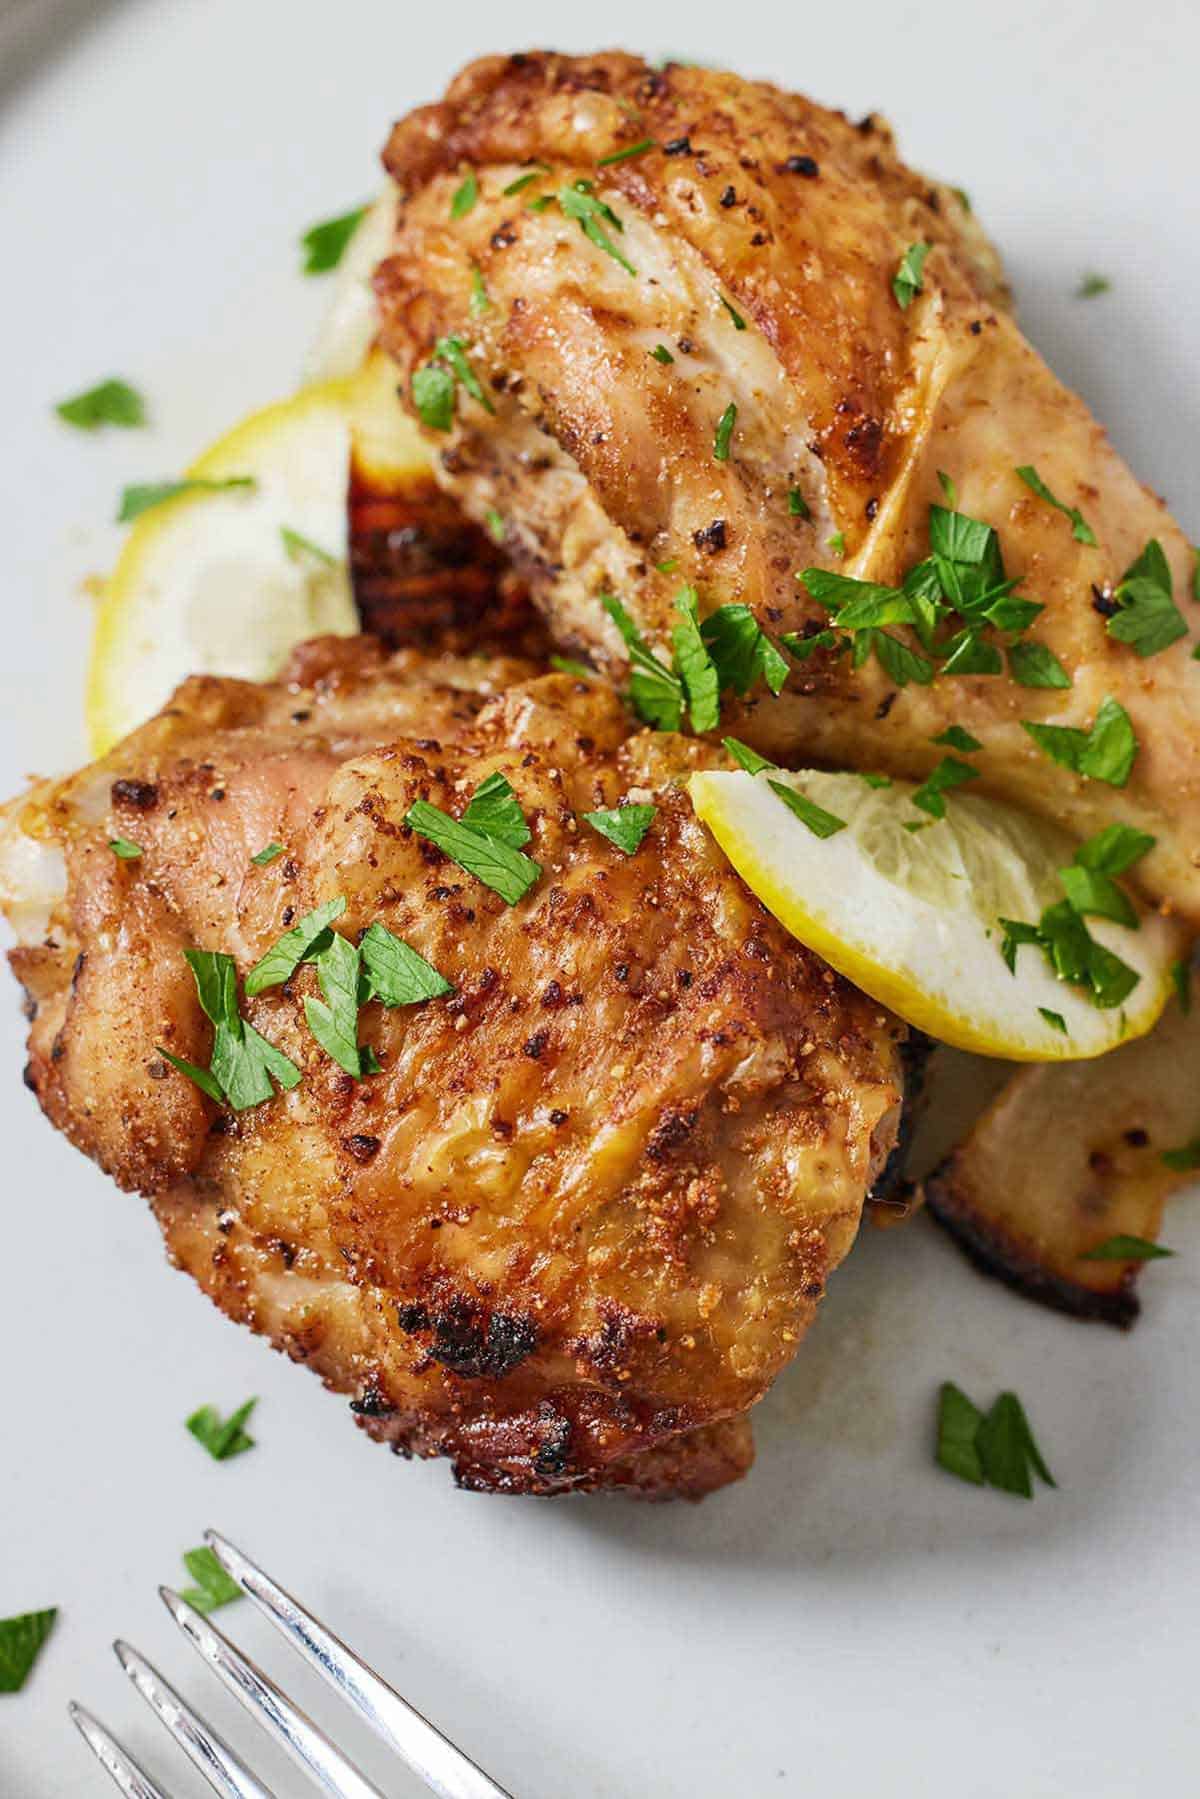 Overhead view of two pieces of air fryer Lebanese chicken with sliced lemon and chopped herbs on a plate.